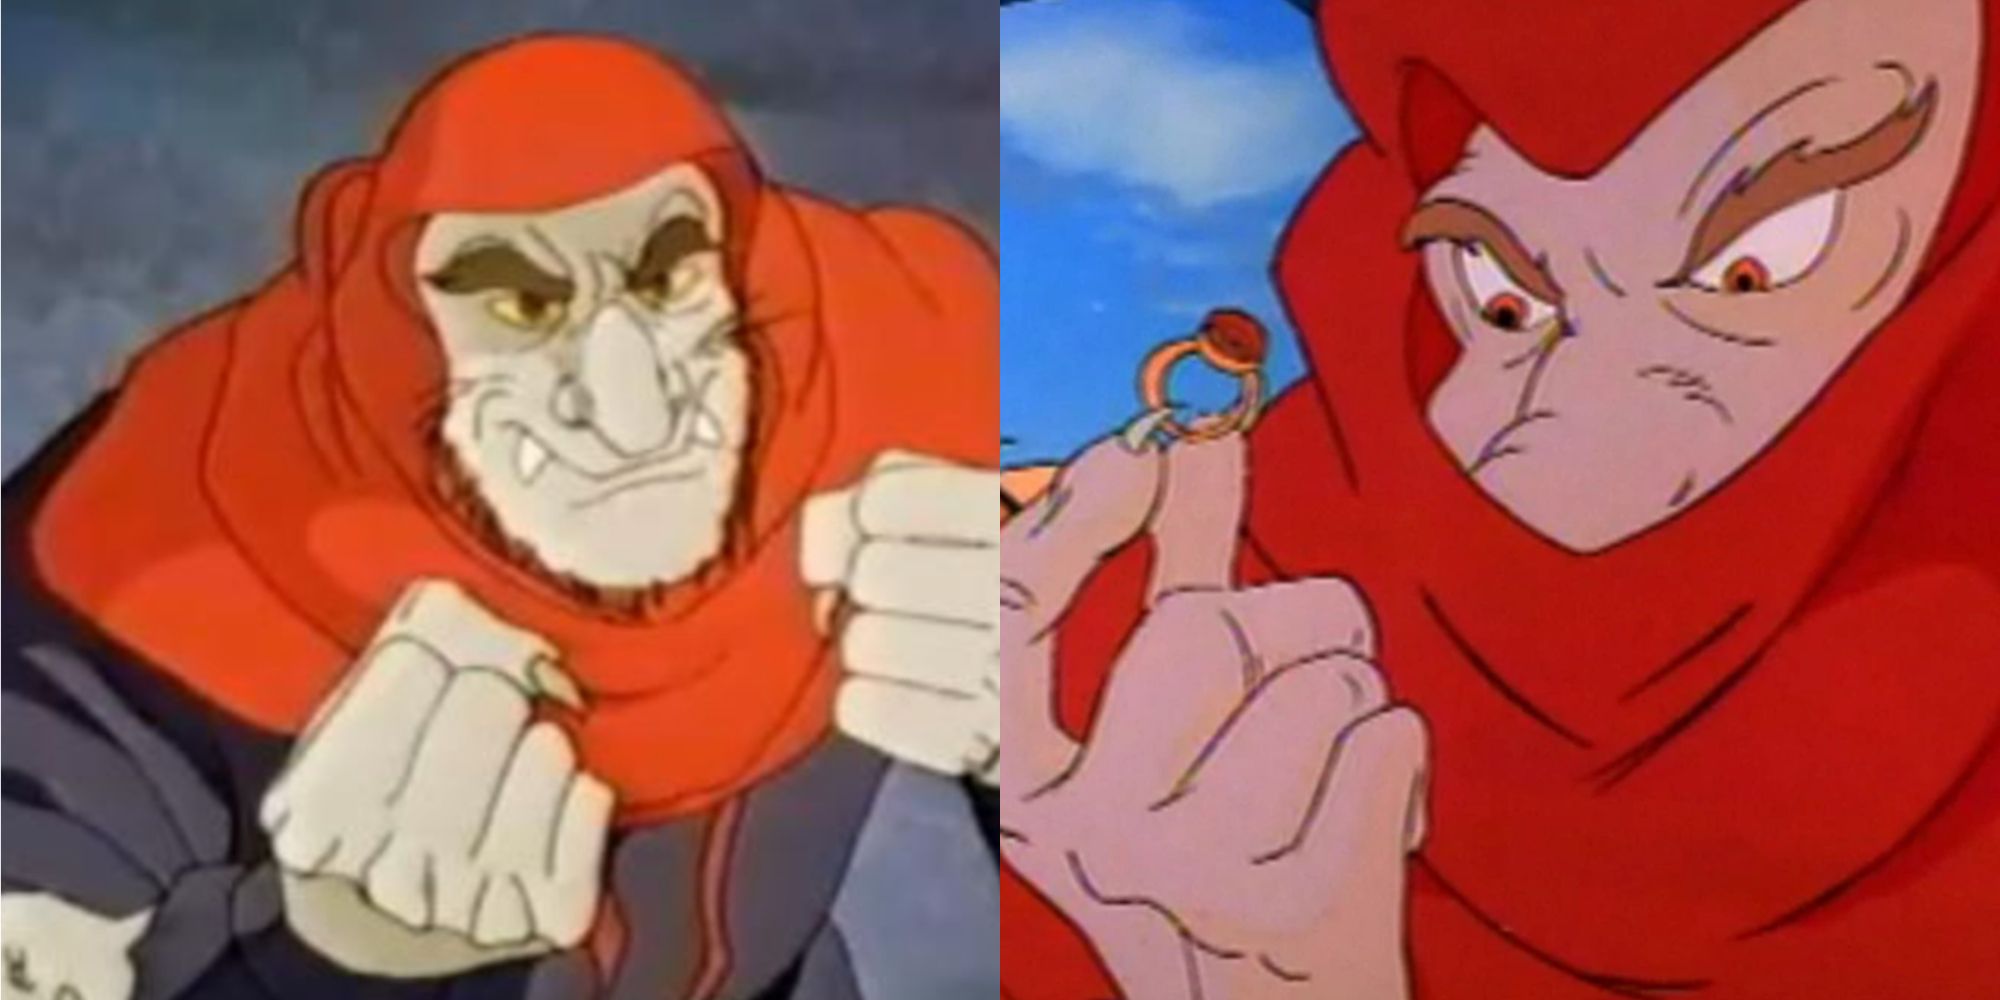 A split image features two looks at Verminous Skumm in Captain Planet and the Planeteers